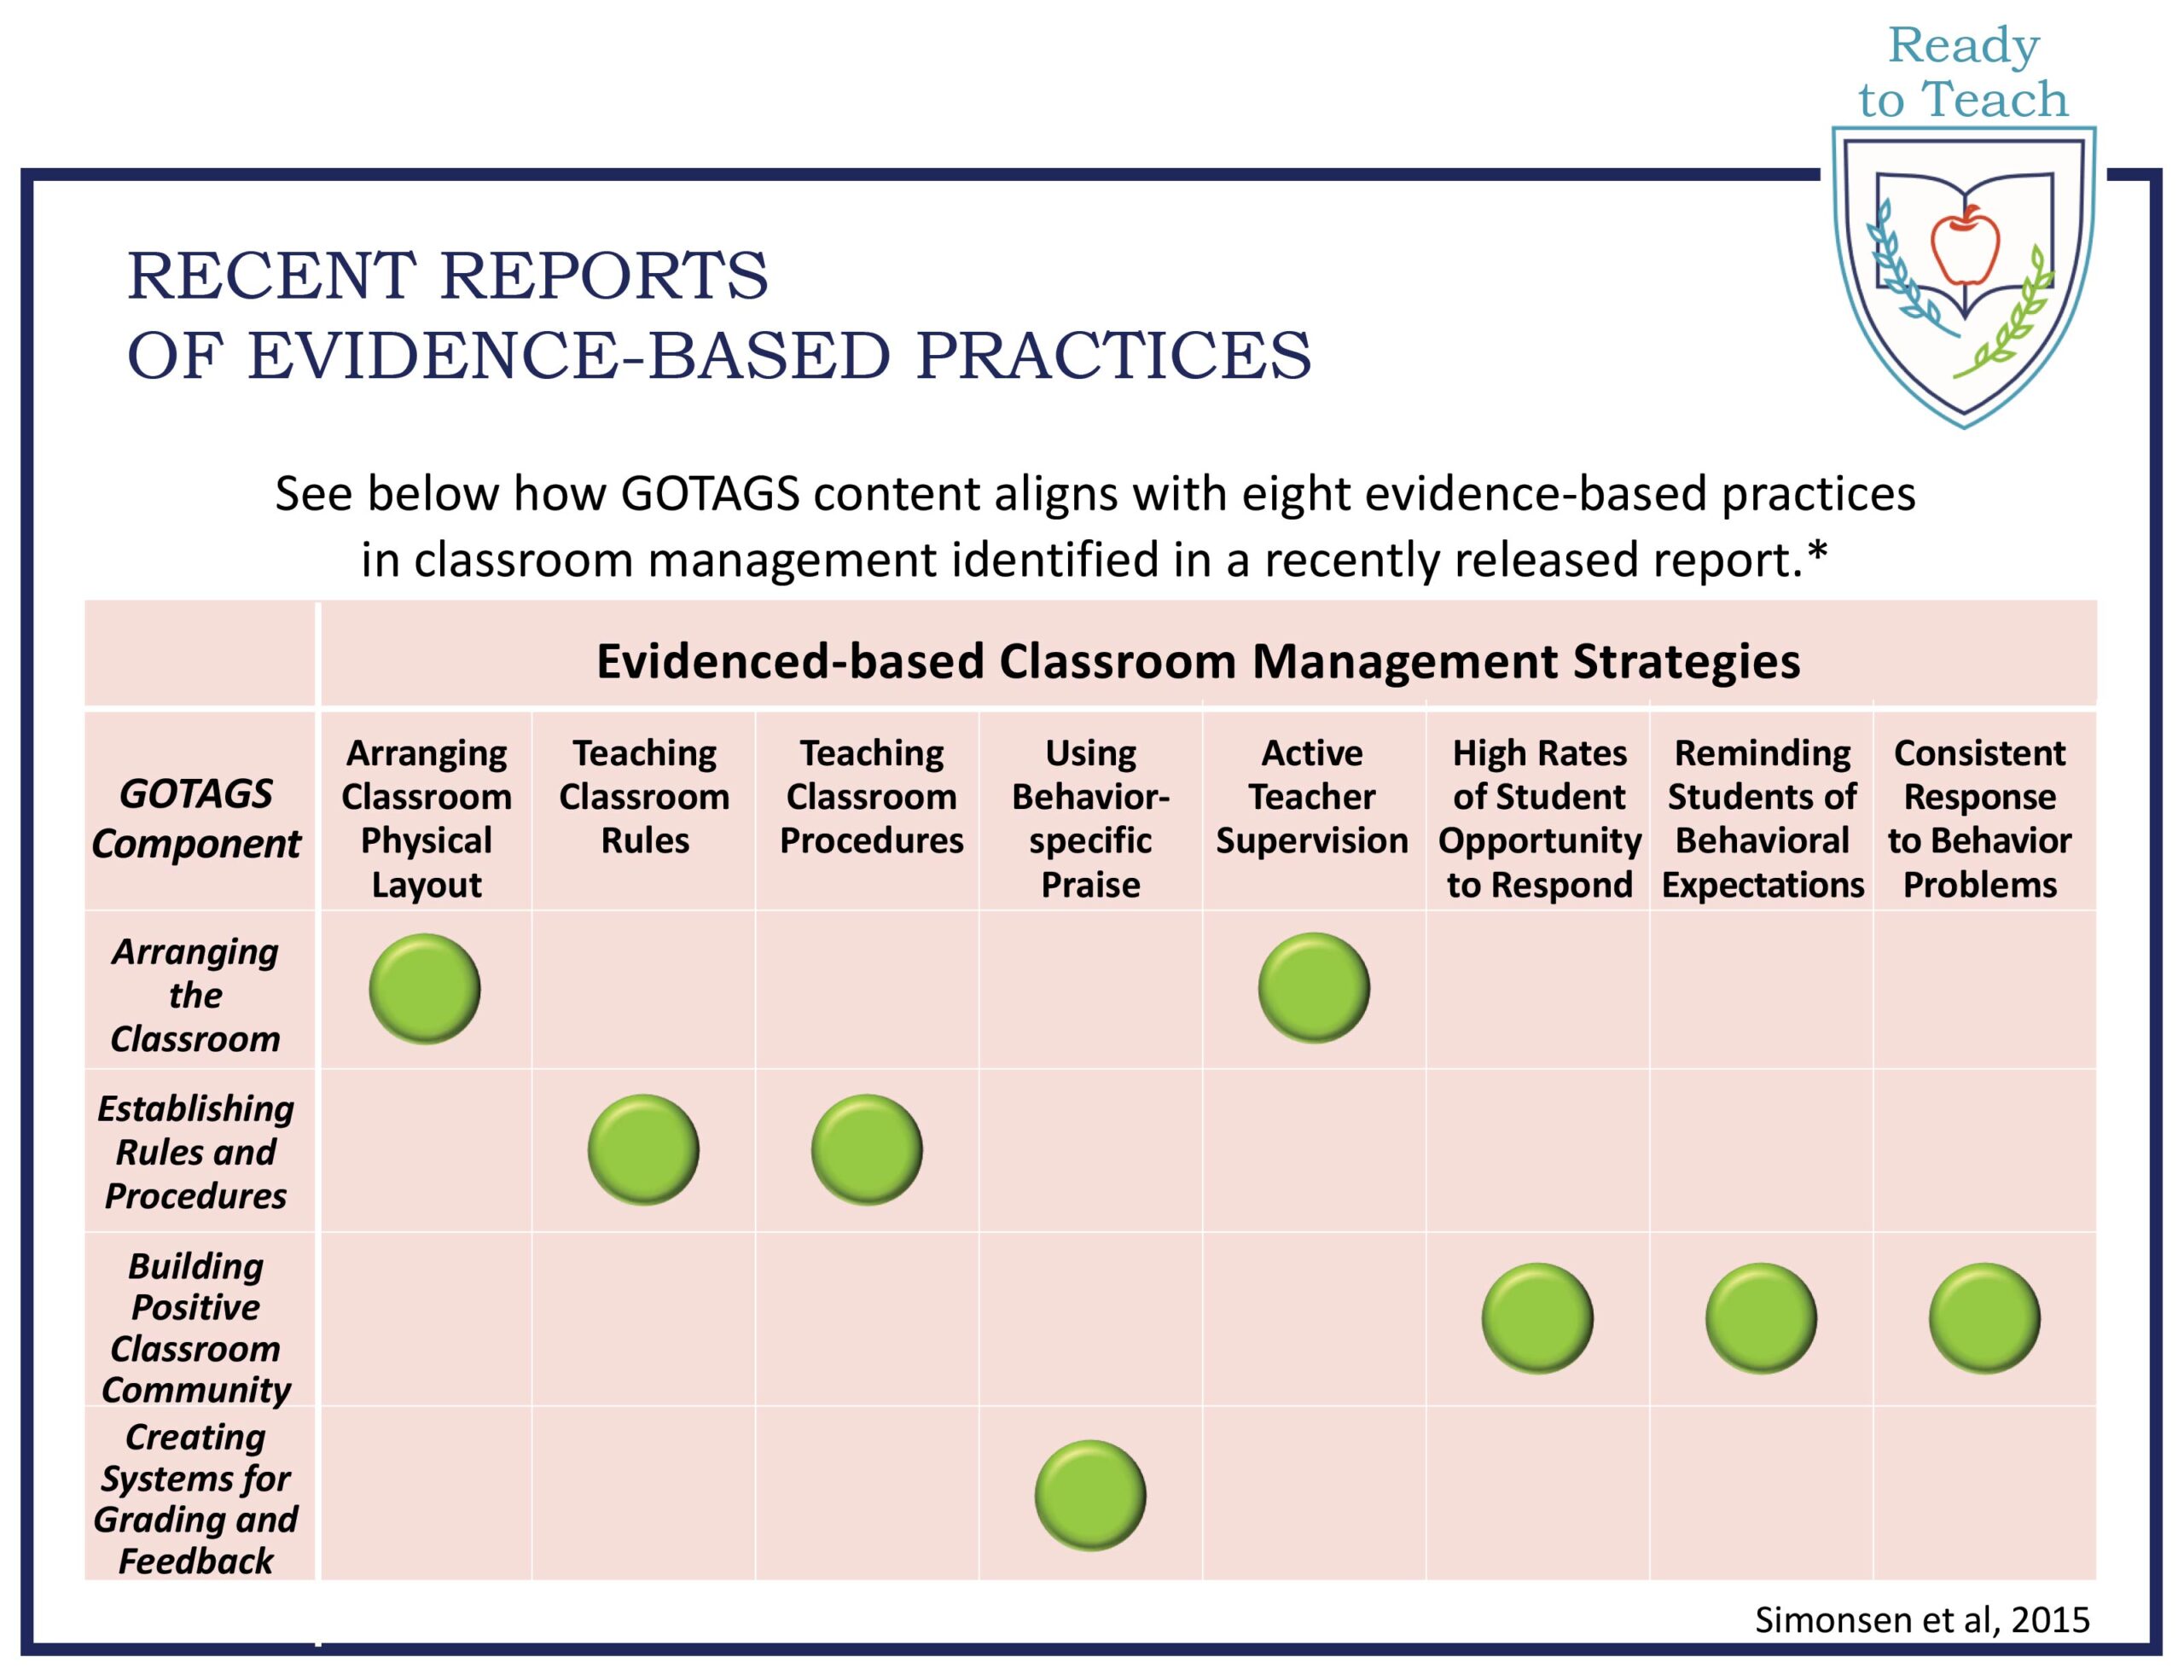 Results chart for Evidence-based Classroom Management Strategies, GOTAGS from Ready To Teach